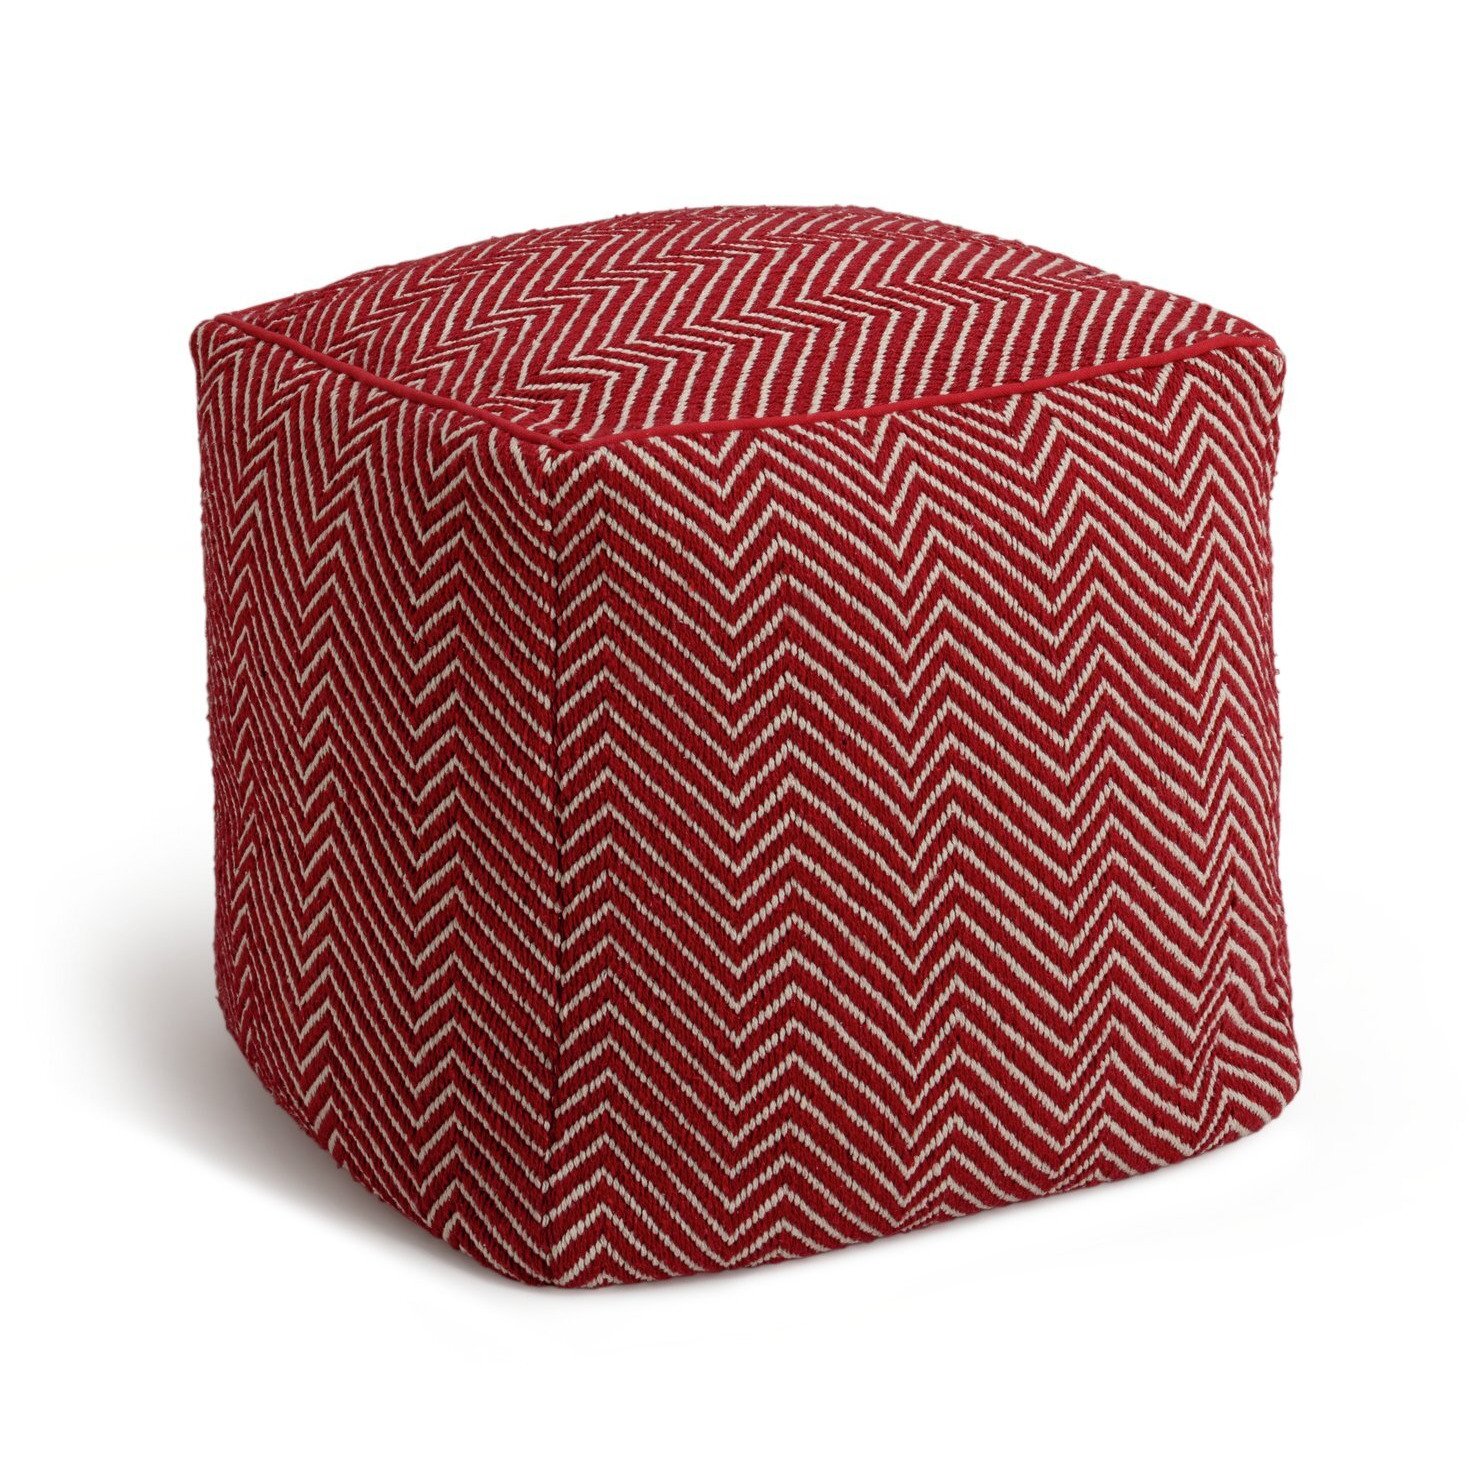 Kaikoo Durrie Cotton Footstool - Red & White - image 1